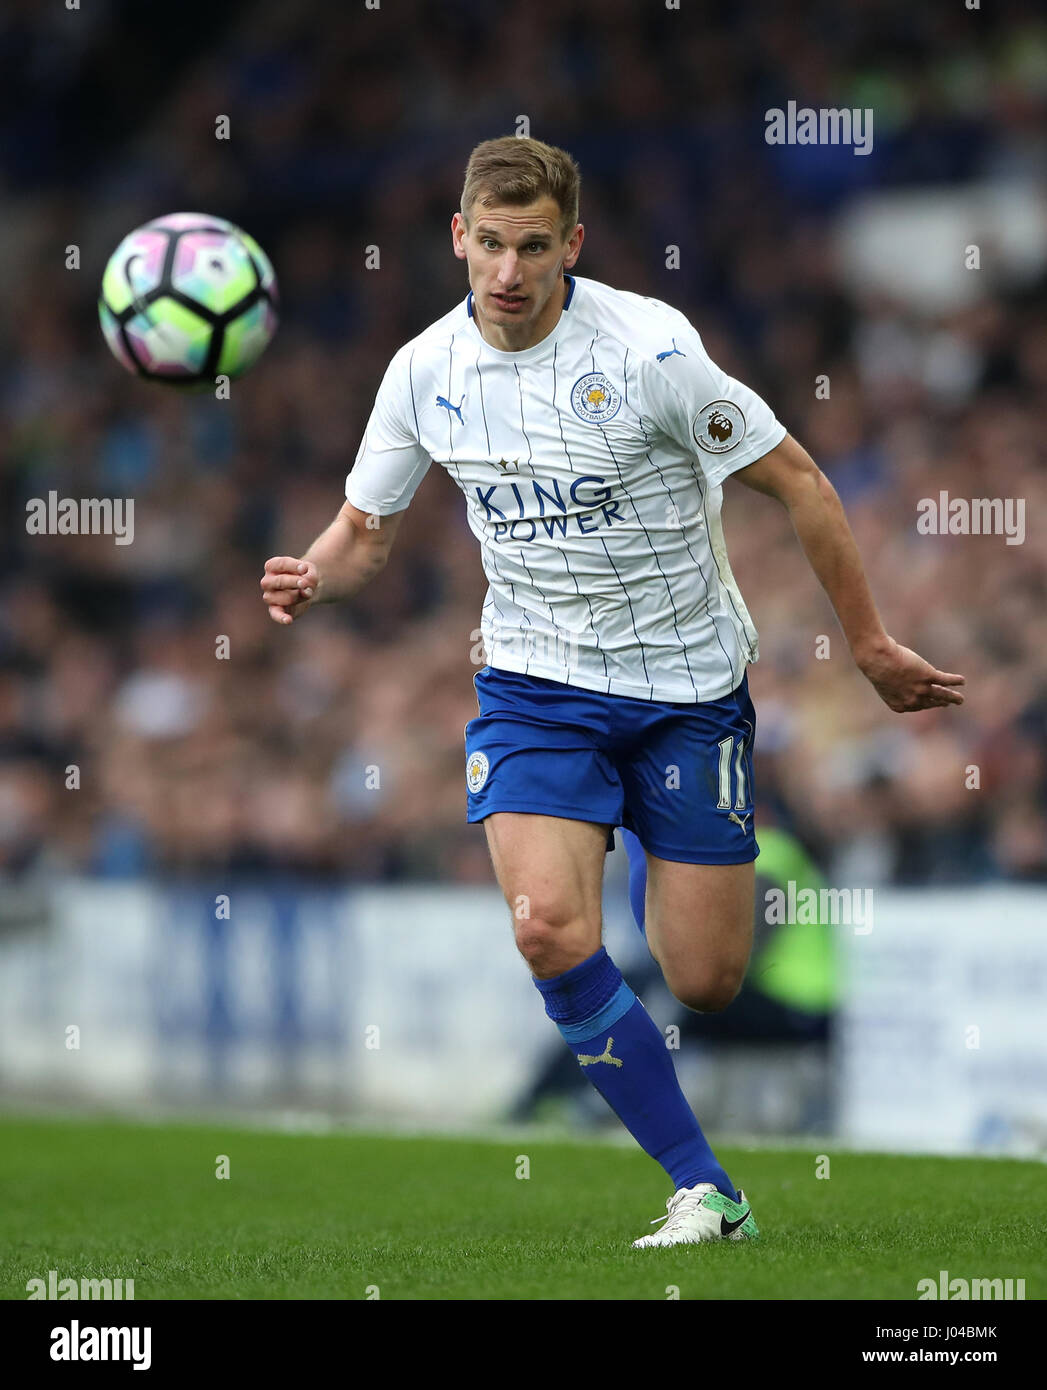 Leicester City's Marc Albrighton during the Premier League match at Goodison Park, Liverpool. PRESS ASSOCIATION Photo. Picture date: Sunday April 9, 2017. See PA story SOCCER Everton. Photo credit should read: Nick Potts/PA Wire. RESTRICTIONS: No use with unauthorised audio, video, data, fixture lists, club/league logos or 'live' services. Online in-match use limited to 75 images, no video emulation. No use in betting, games or single club/league/player publications. Stock Photo